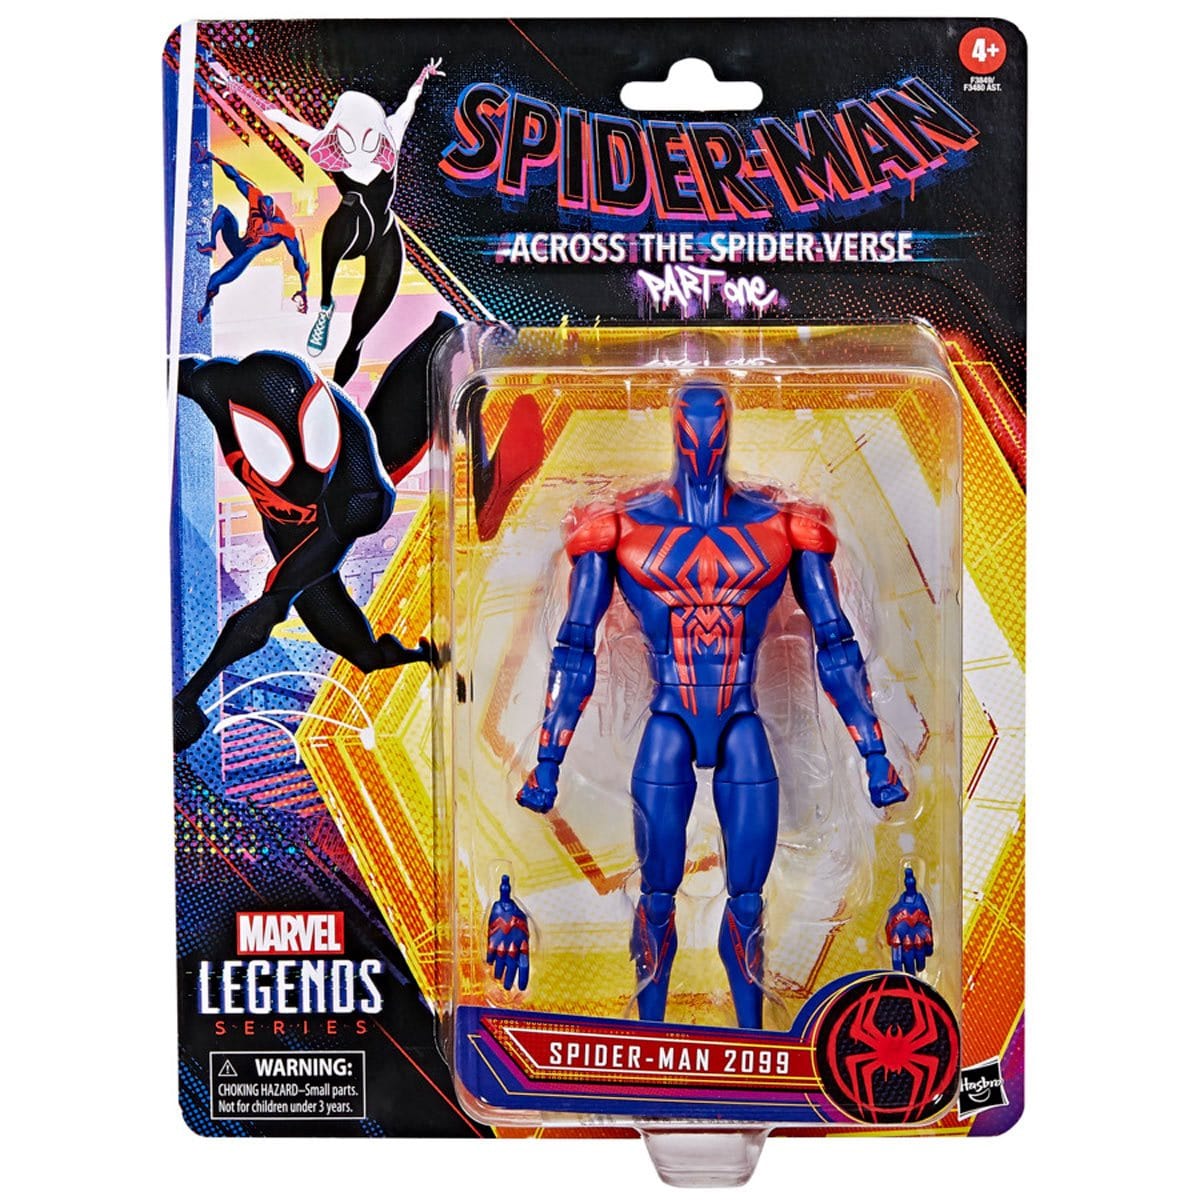 Across-the-Spider-Verse-15-cm-Spider-Man-2099-Toy-Gift-Collectible-MARVEL-disney-SONY-PART-ONE-LEGENDS-SERIES